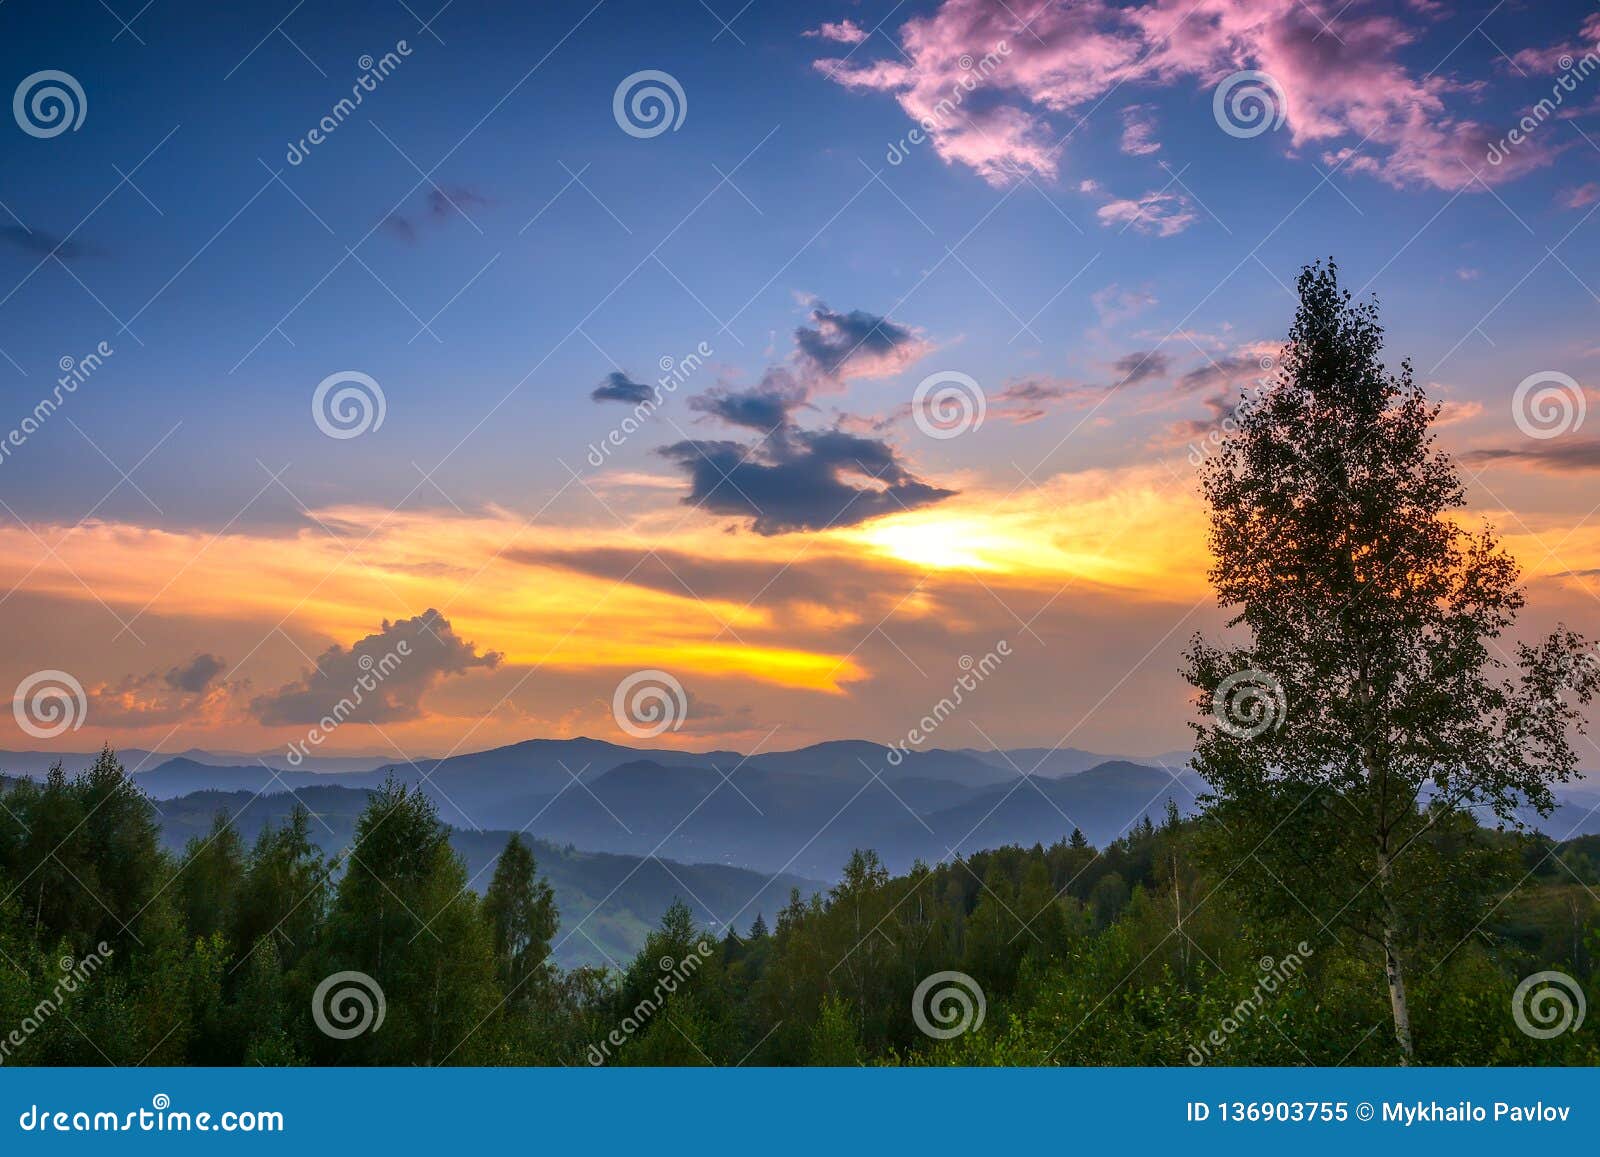 Multicolor Sunset Sky in Forested Mountains Stock Image - Image of dusk